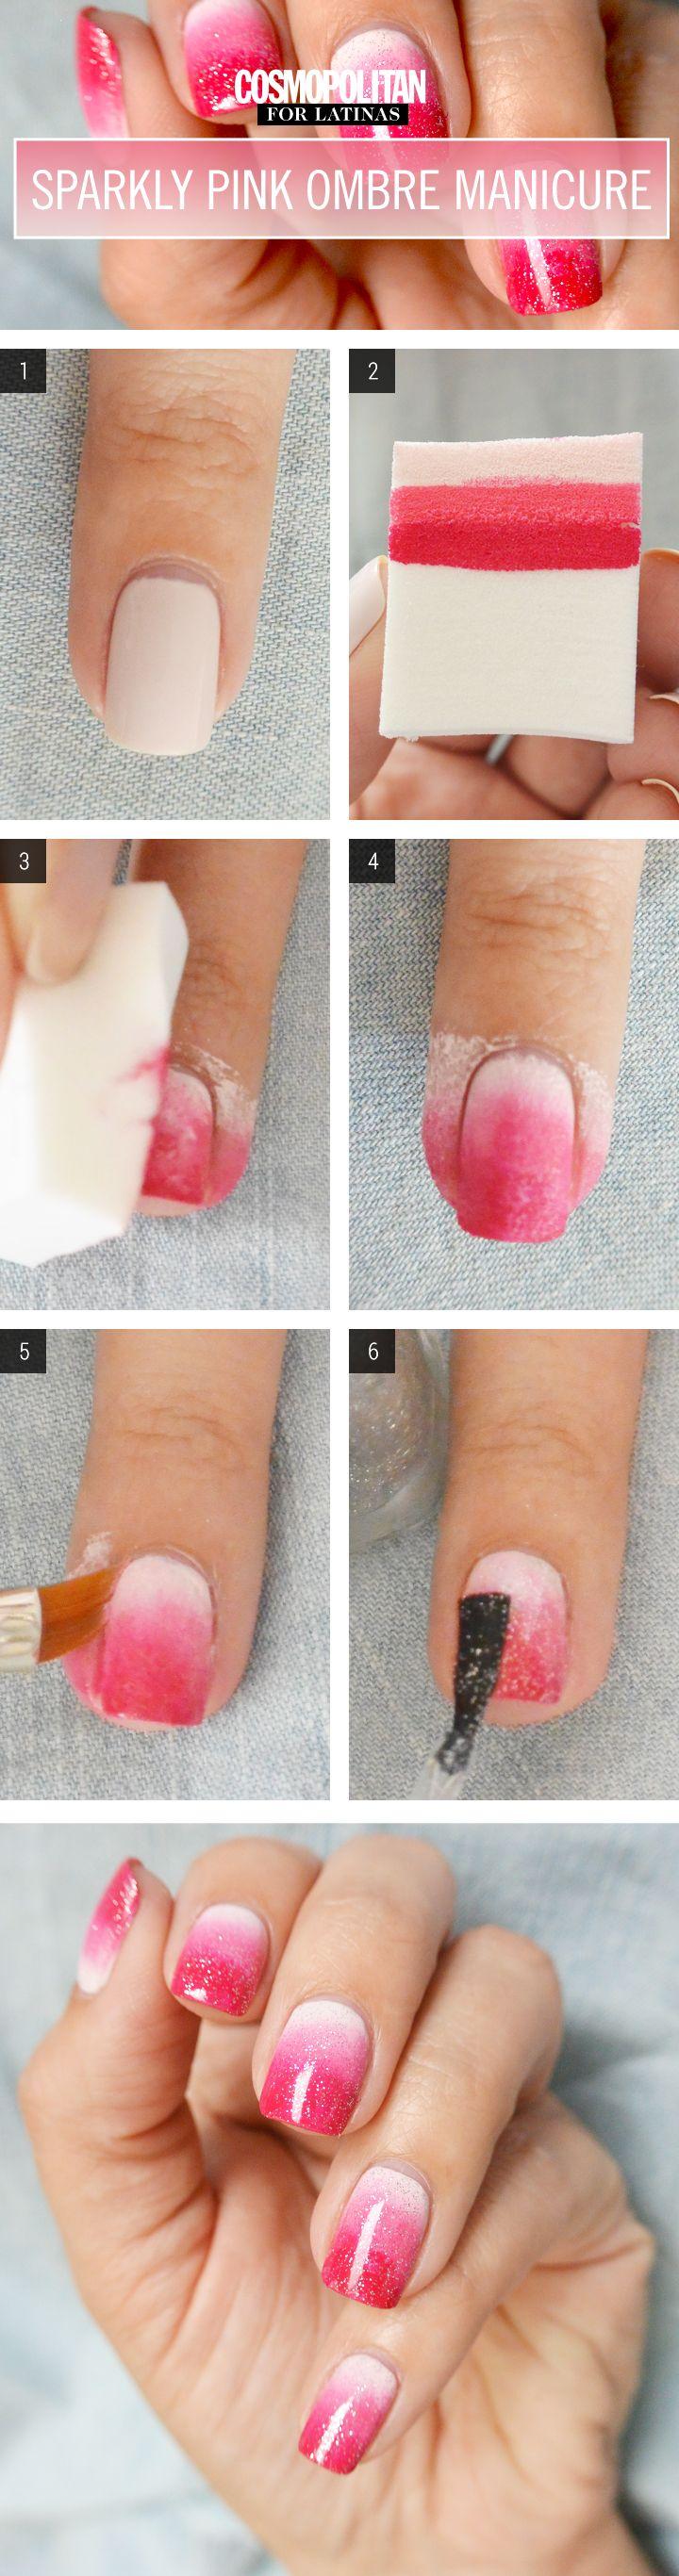 Wedding - Nail Art How-To: Sparkly Pink Ombre Manicure